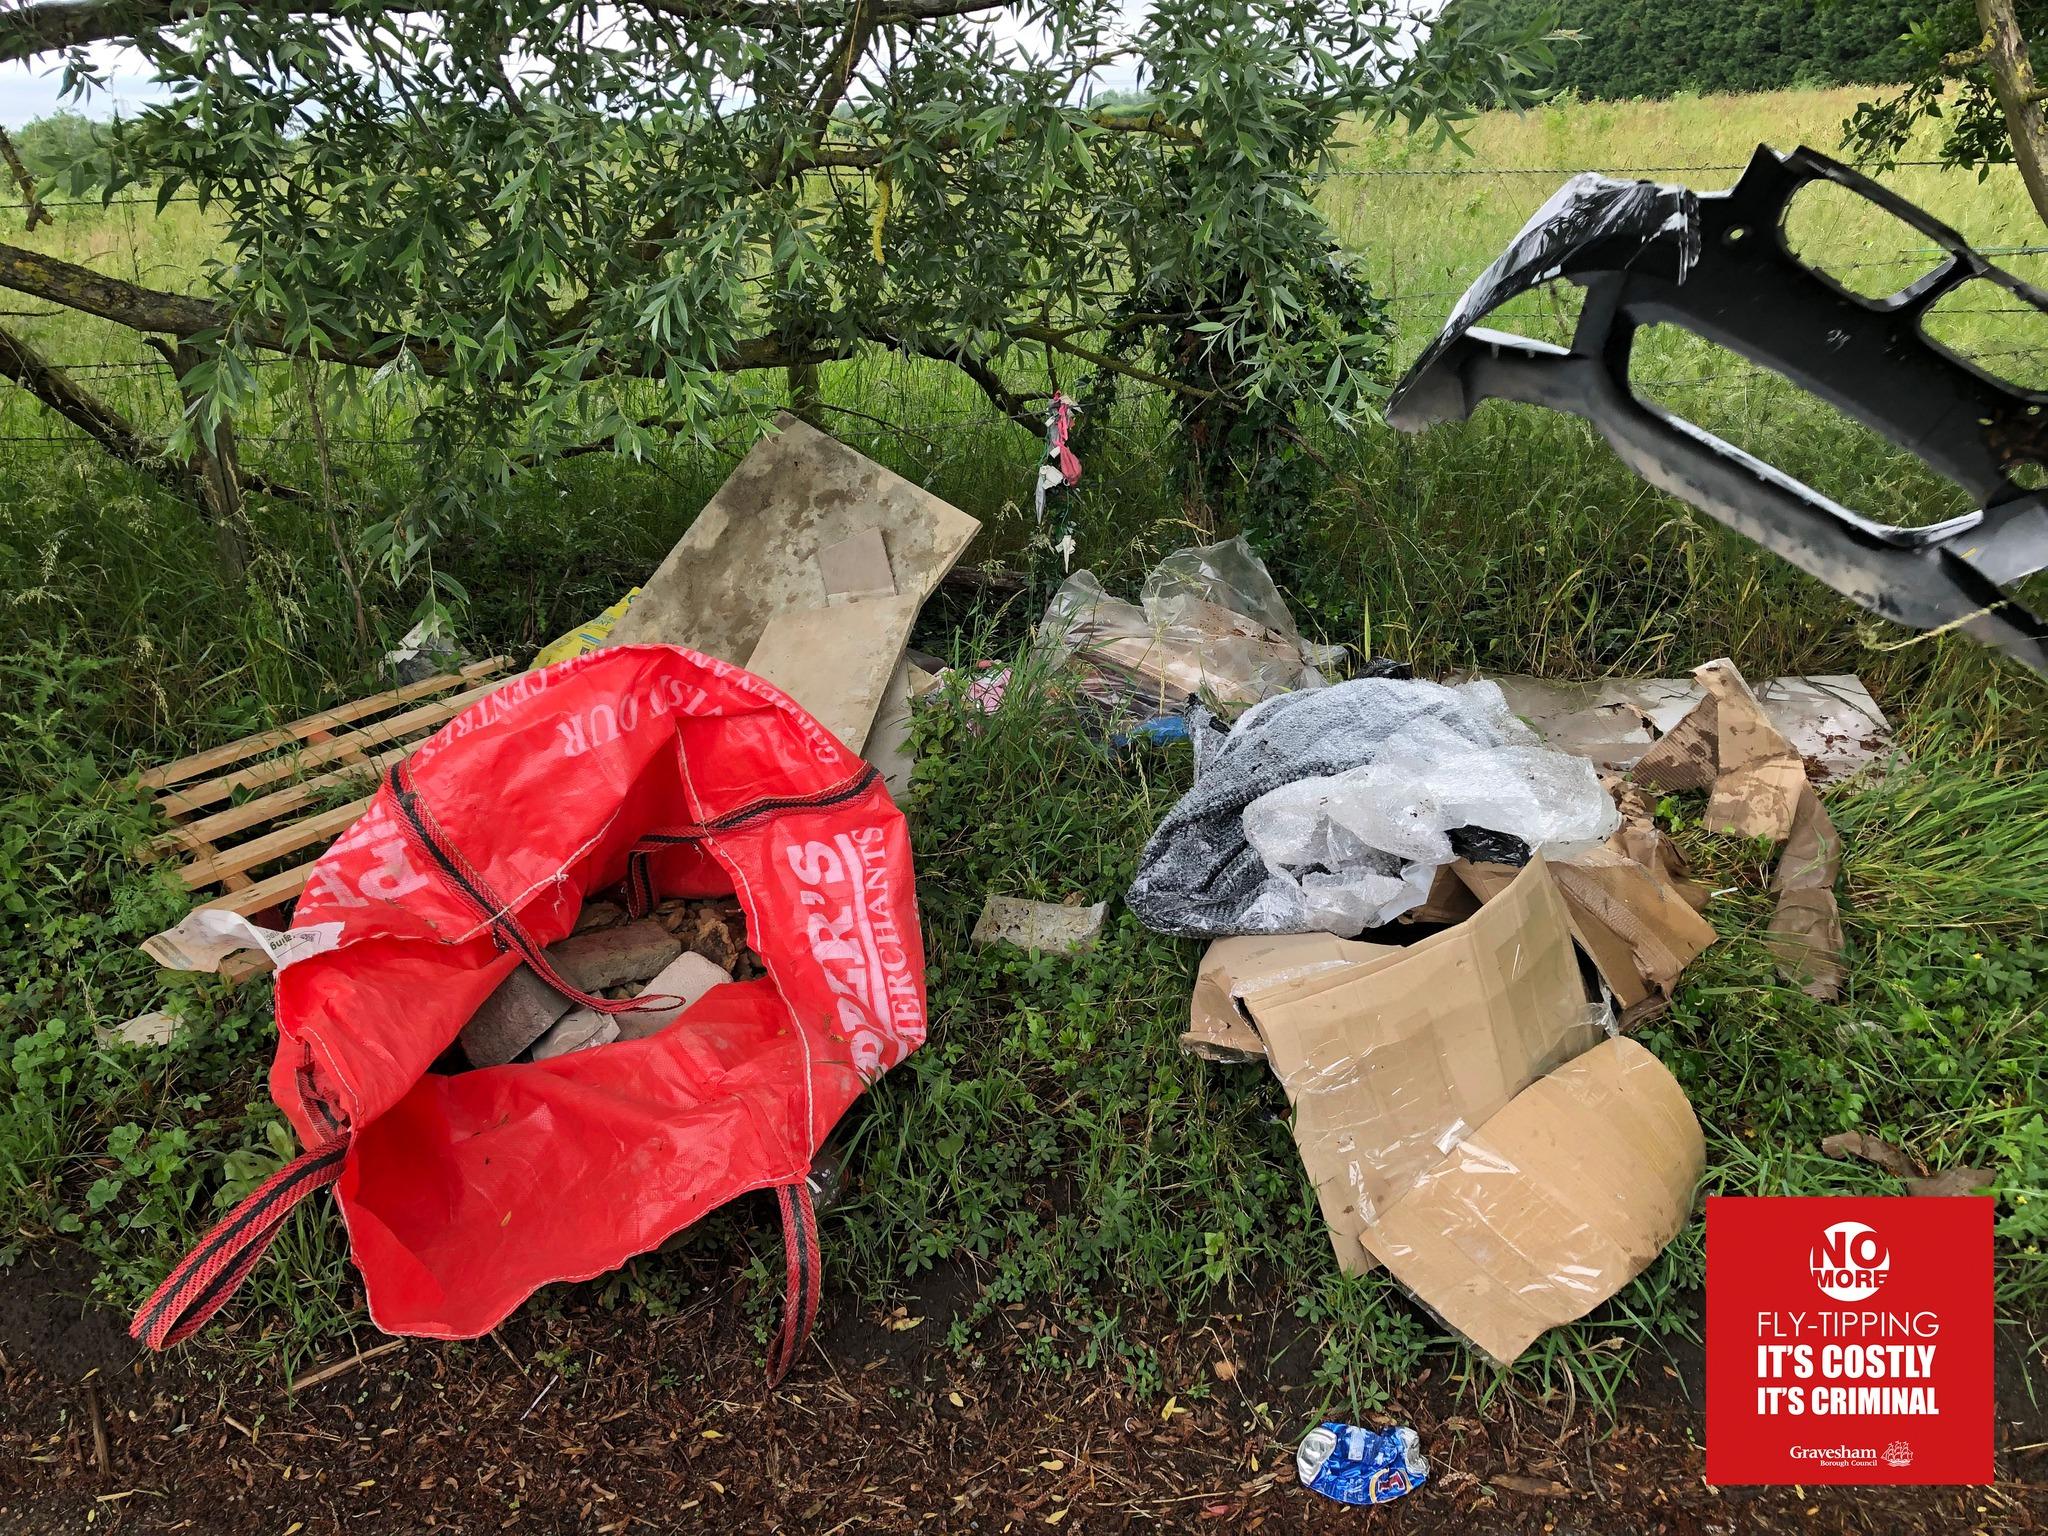 Countryside showing flytipping of waste, cardboard and rubble alongside a red waste bag.